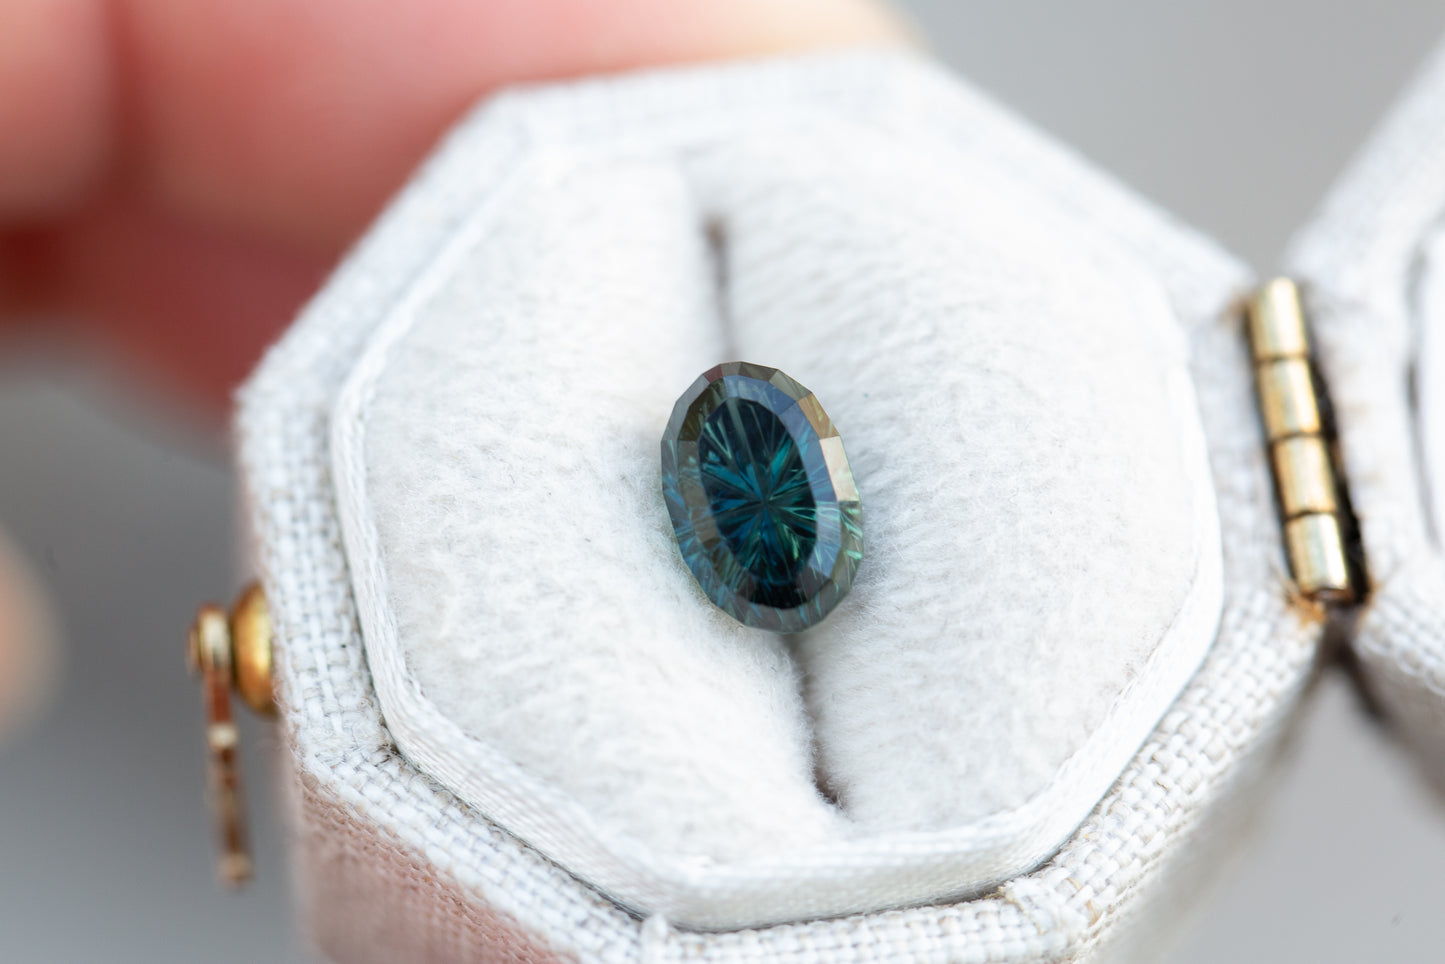 Load image into Gallery viewer, 1.92ct oval dark blue green sapphire - Starbrite cut by John Dyer
